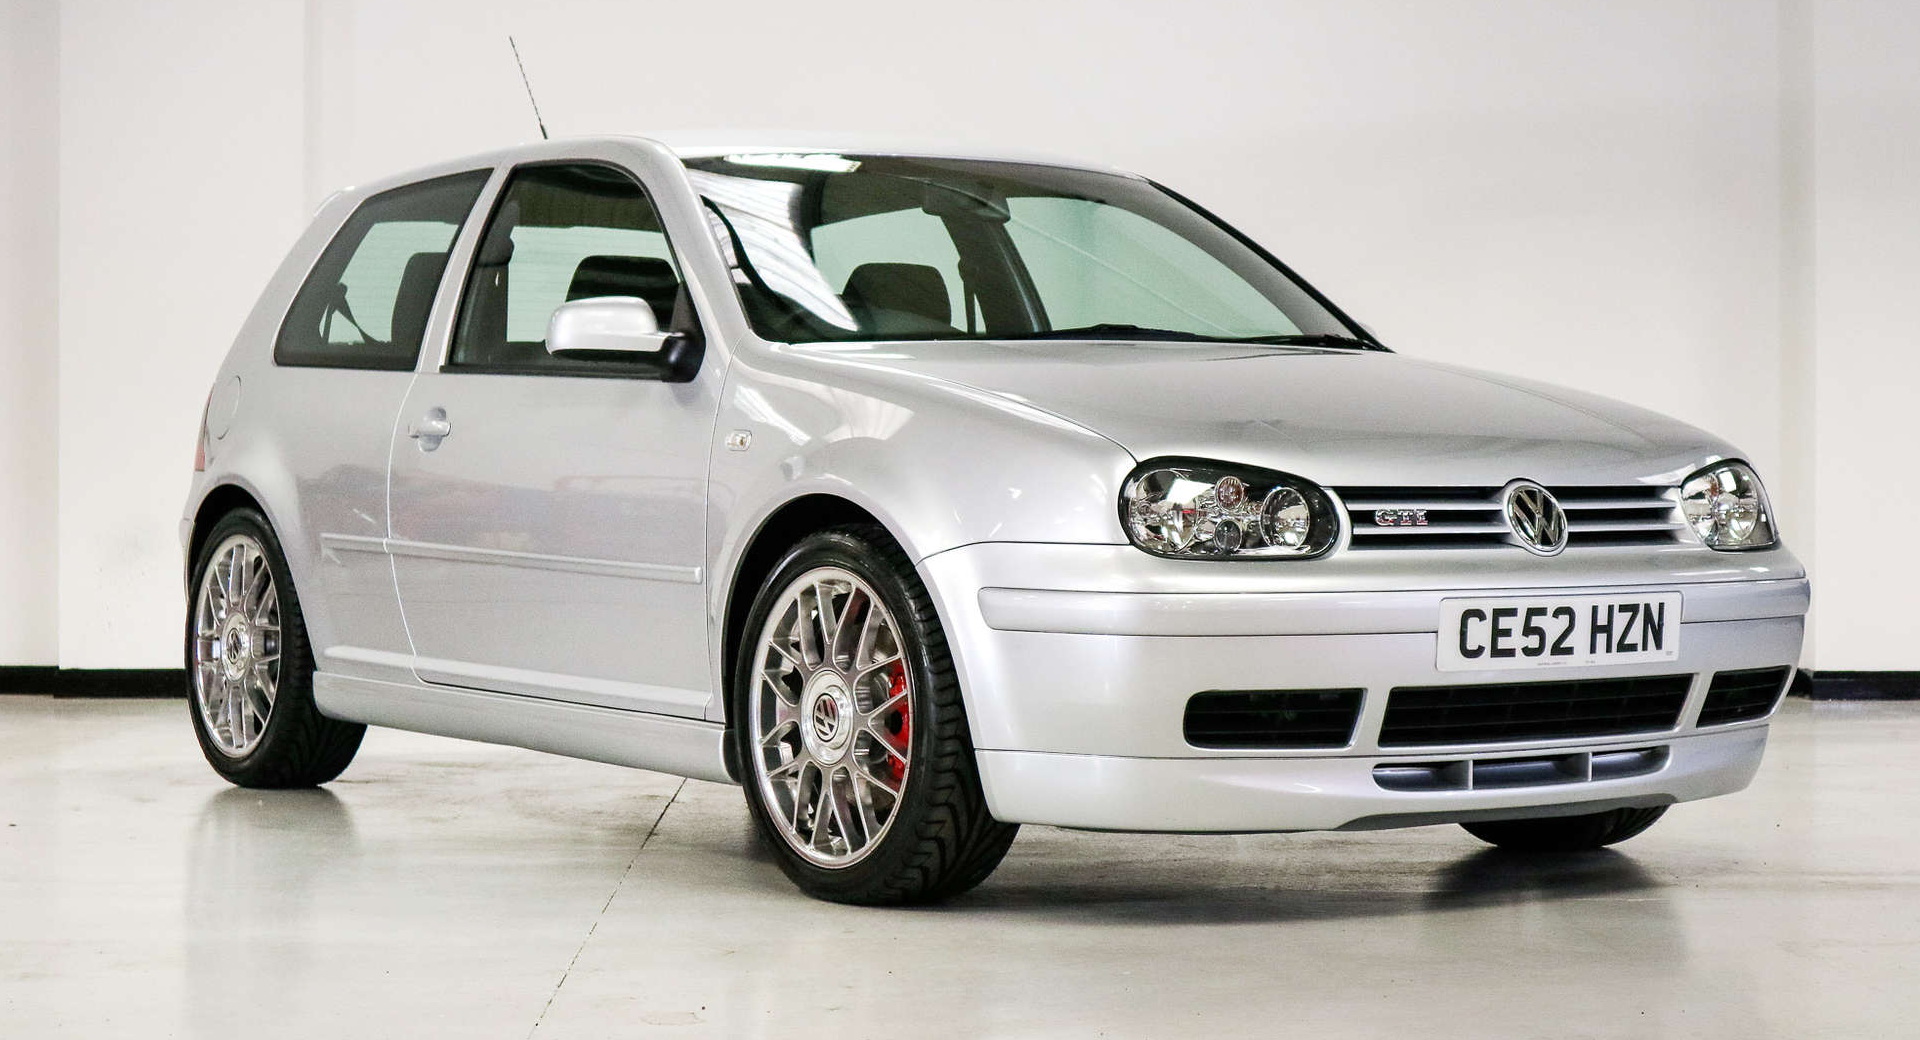 https://www.carscoops.com/wp-content/uploads/2021/07/2002-VW-Golf-GTI-25th-Anniversary-Edition-8-Mile-1.jpg